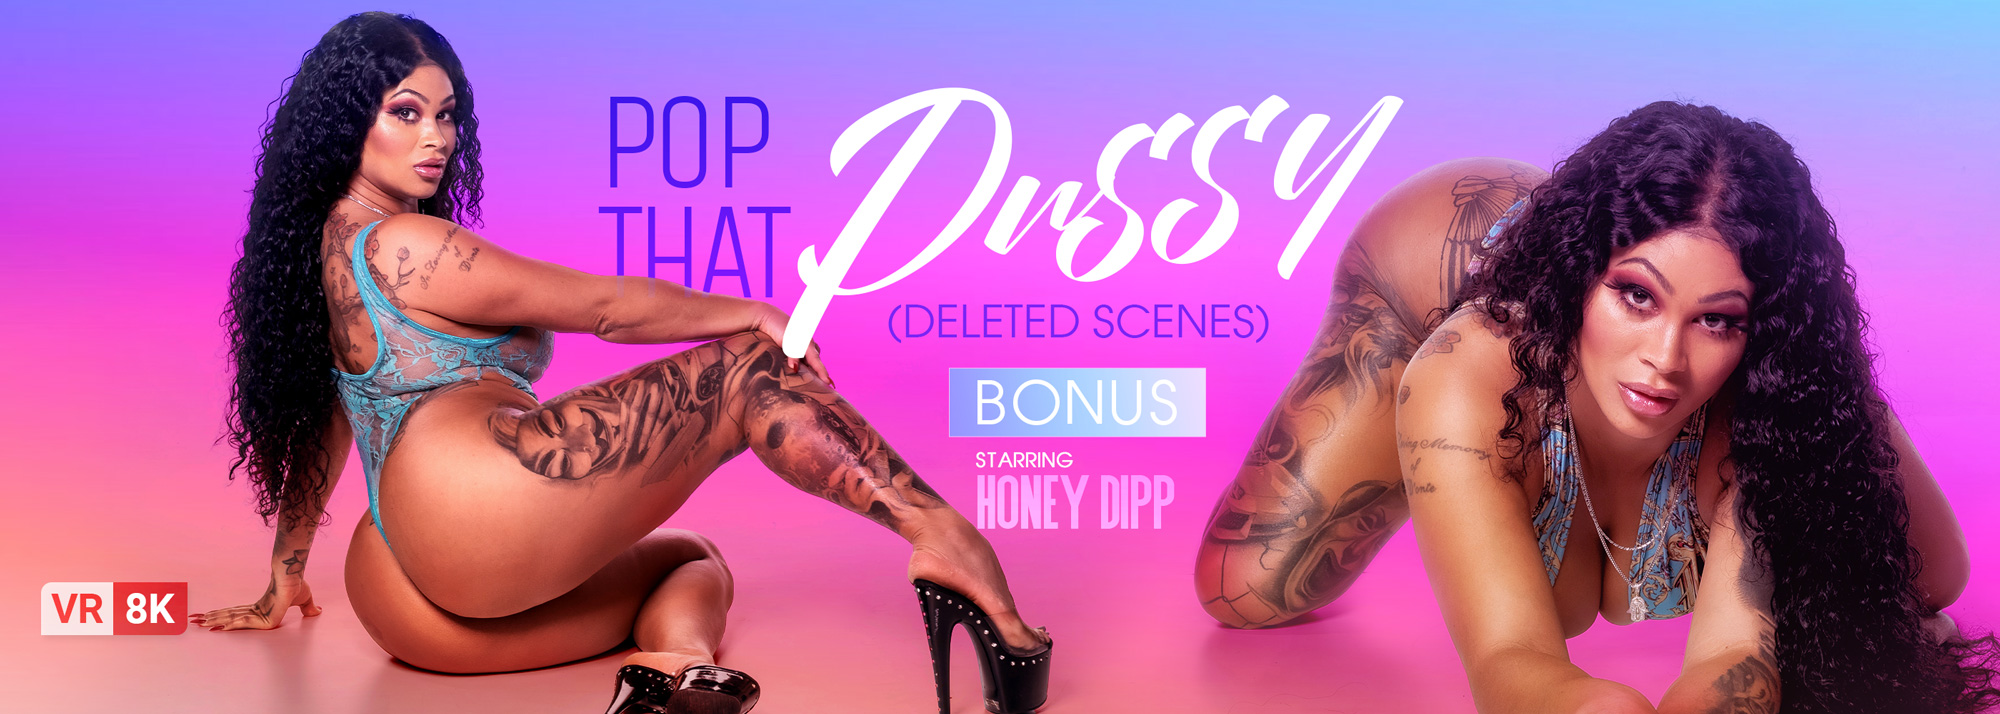 Pop That Pussy (Deleted Scenes) with Honey Dipp  Slideshow